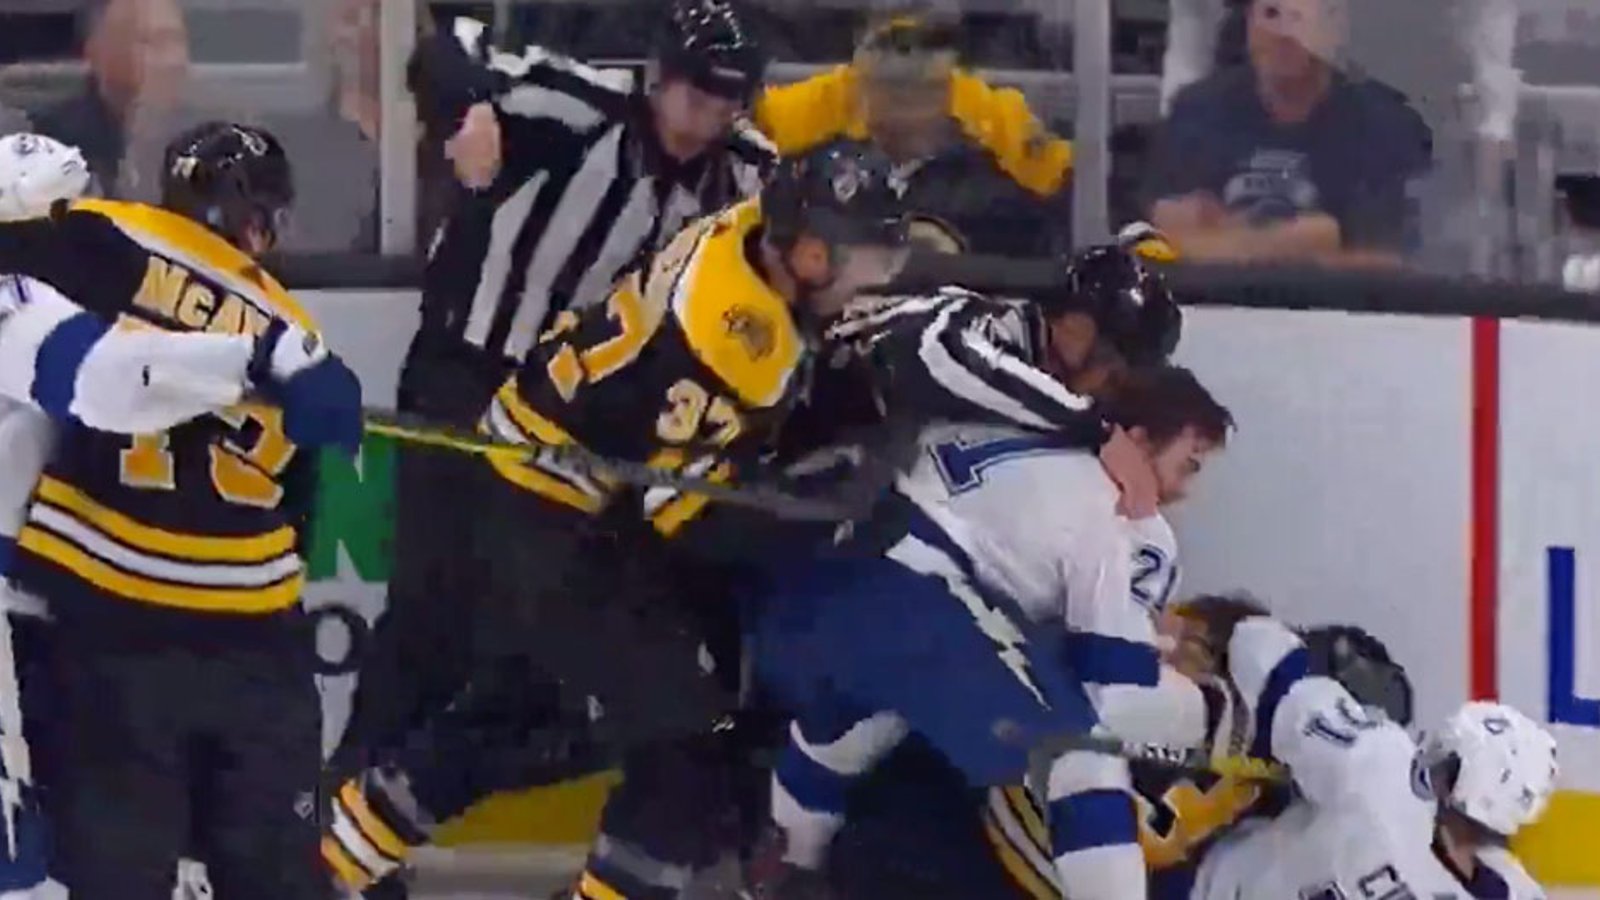 Marchand headlocks Point in dying seconds of OT and huge scrum ensues! 